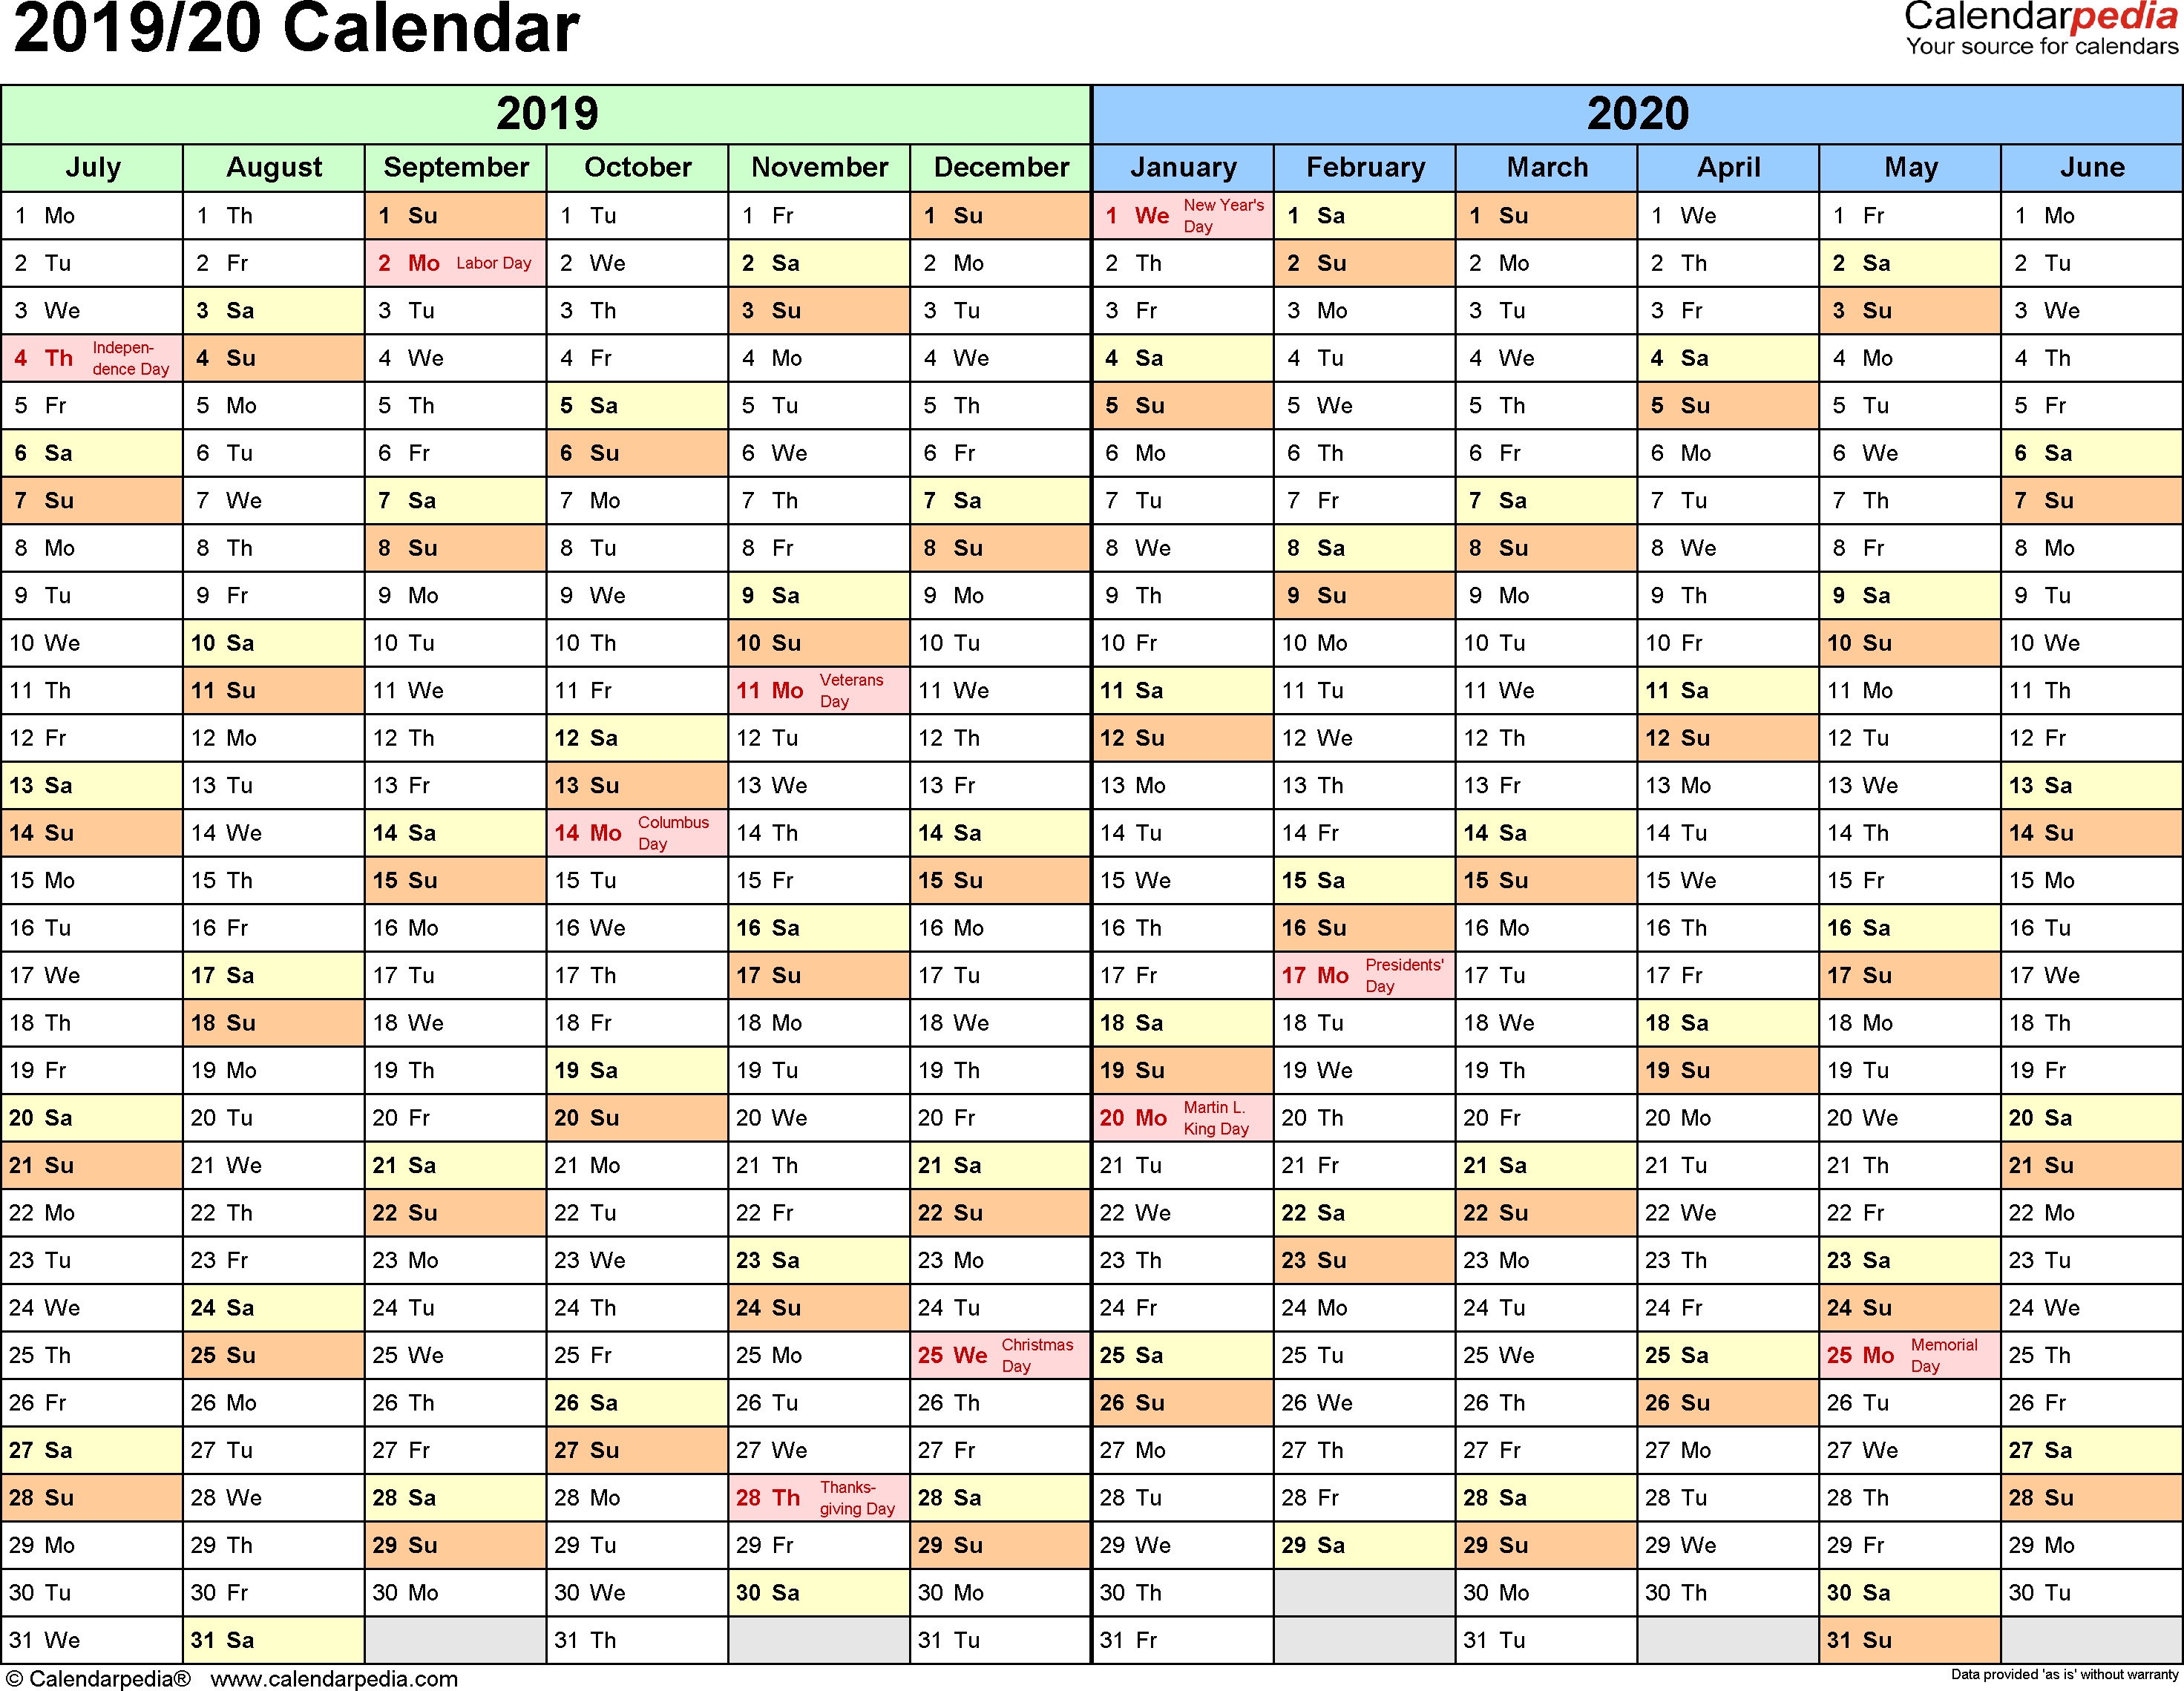 Split Year Calendars 2019/2020 (July To June) - Word Templates intended for Microsoft Word Calendar Template 2019-2020